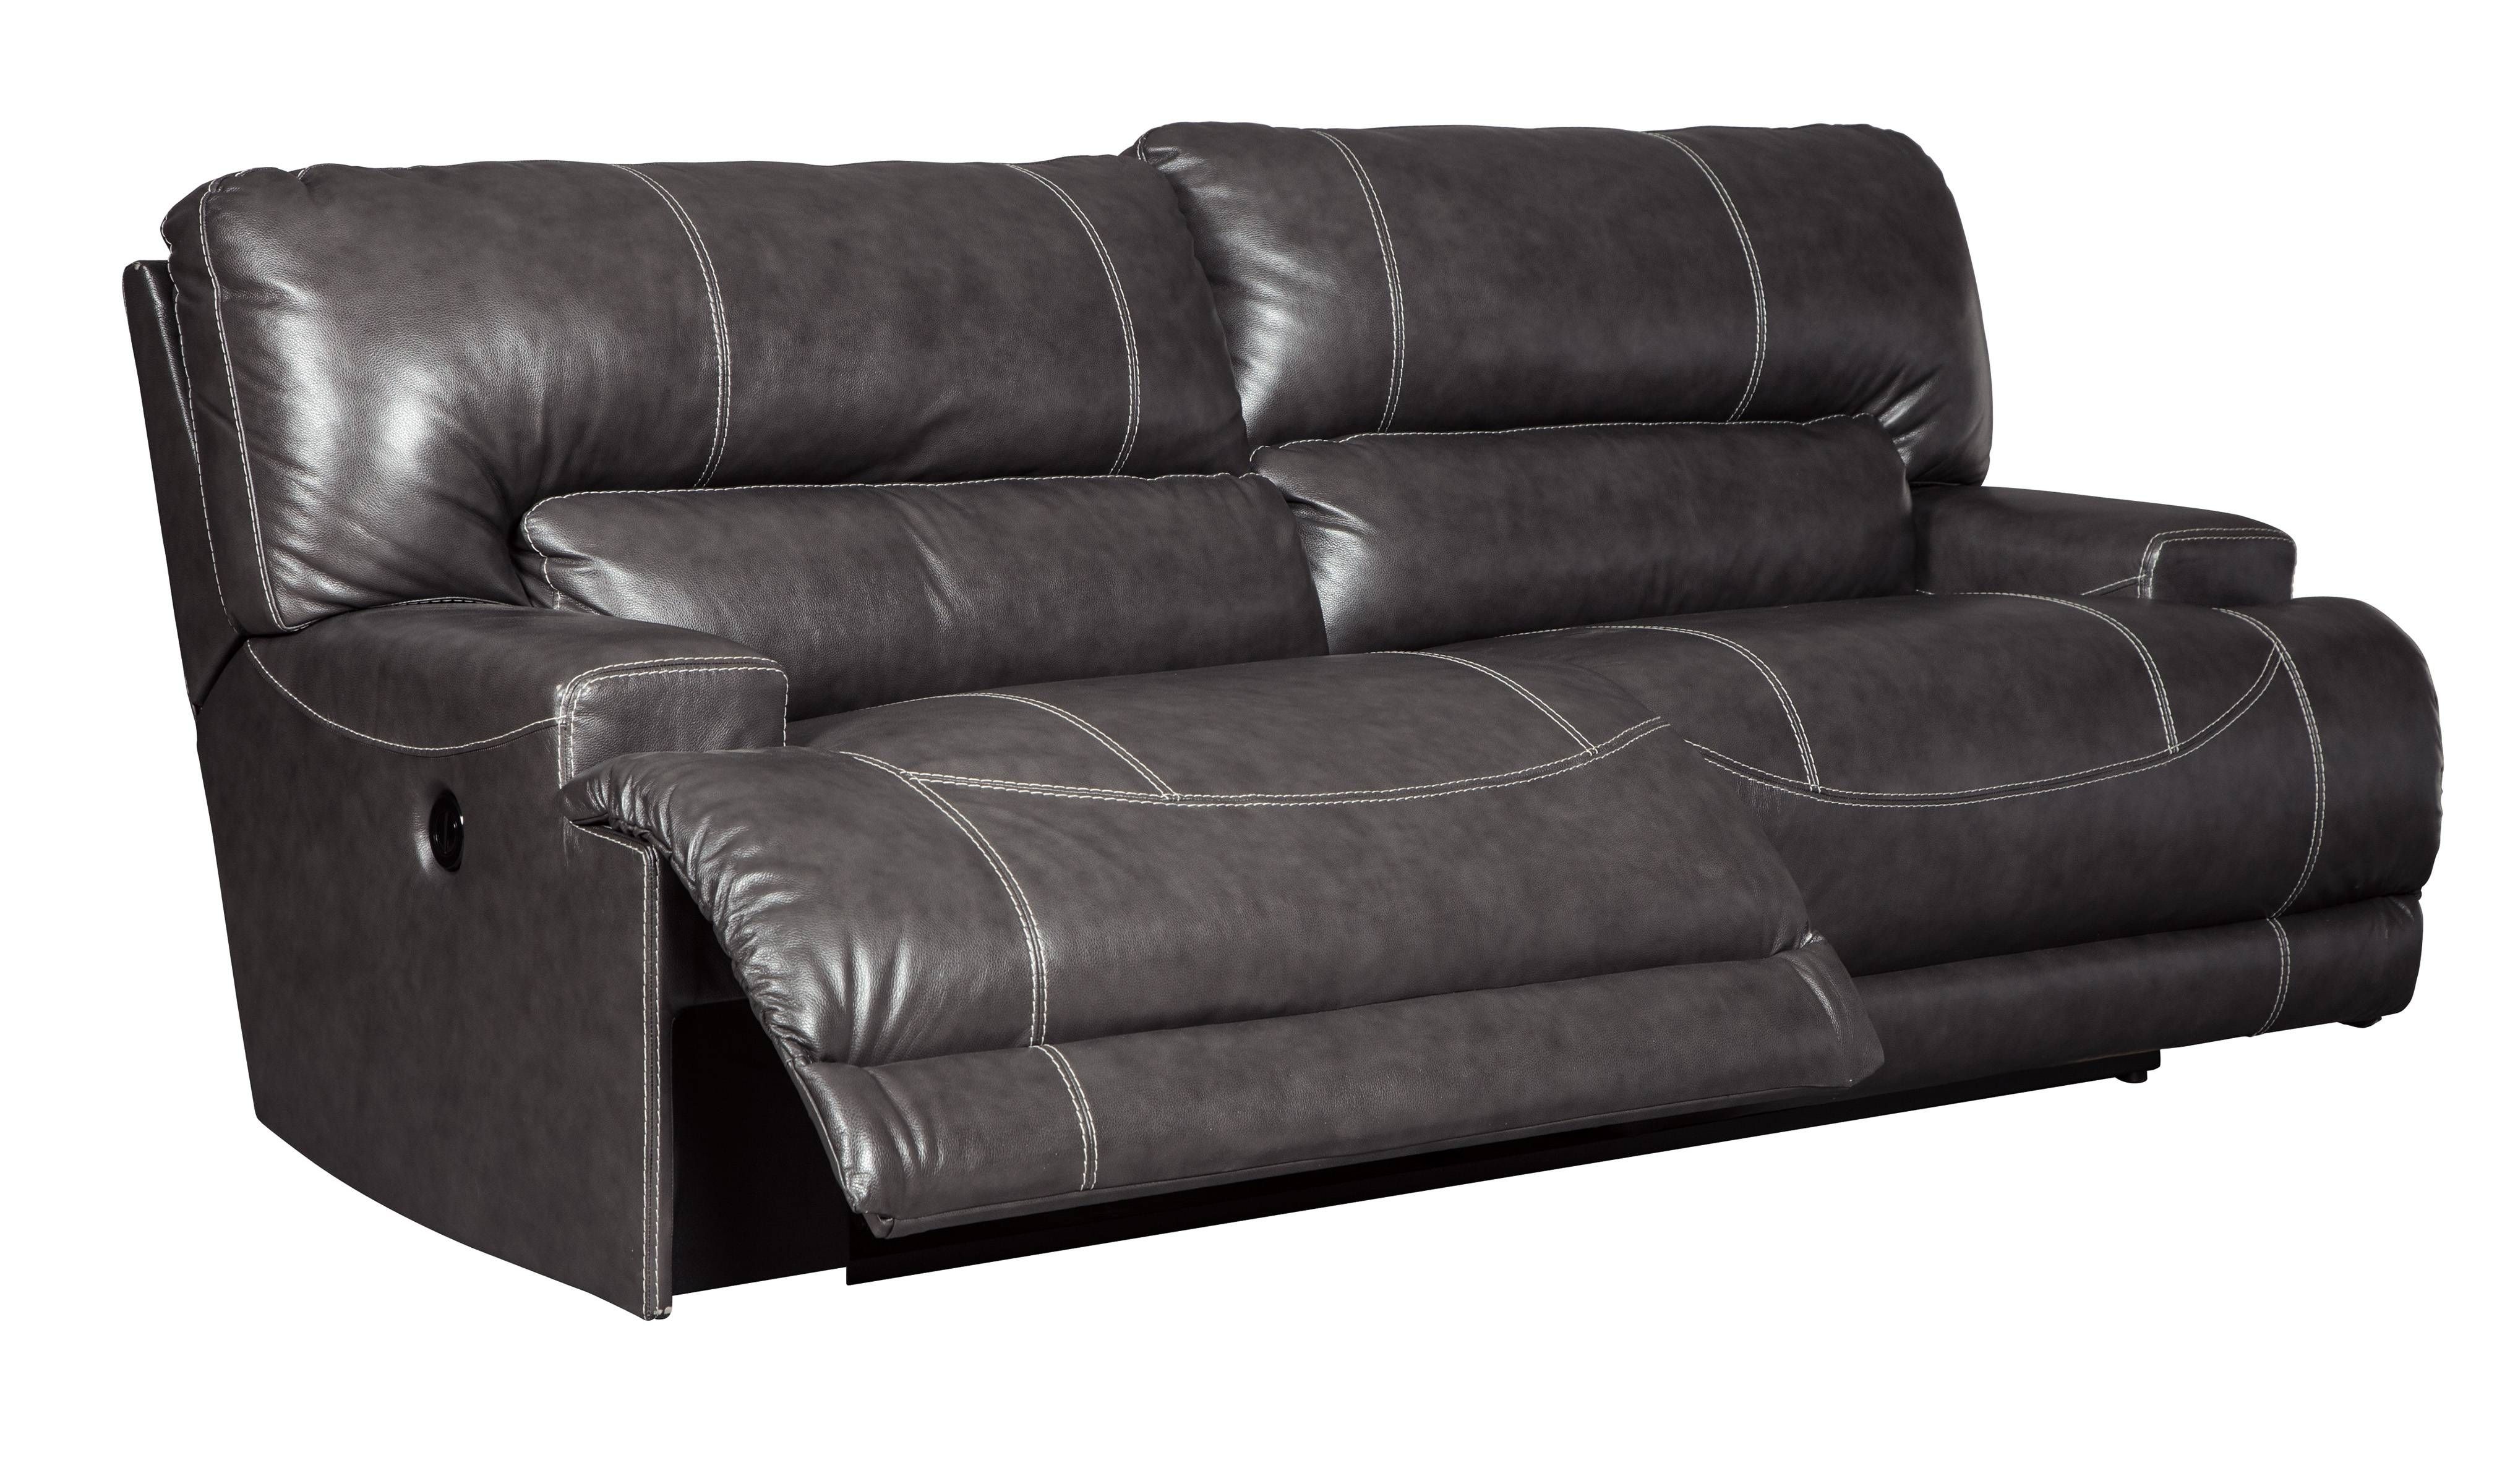 Mccaskill Contemporary Gray Leather 2 Seat Reclining Sofa | Living Inside 2 Seater Recliner Leather Sofas (View 30 of 30)